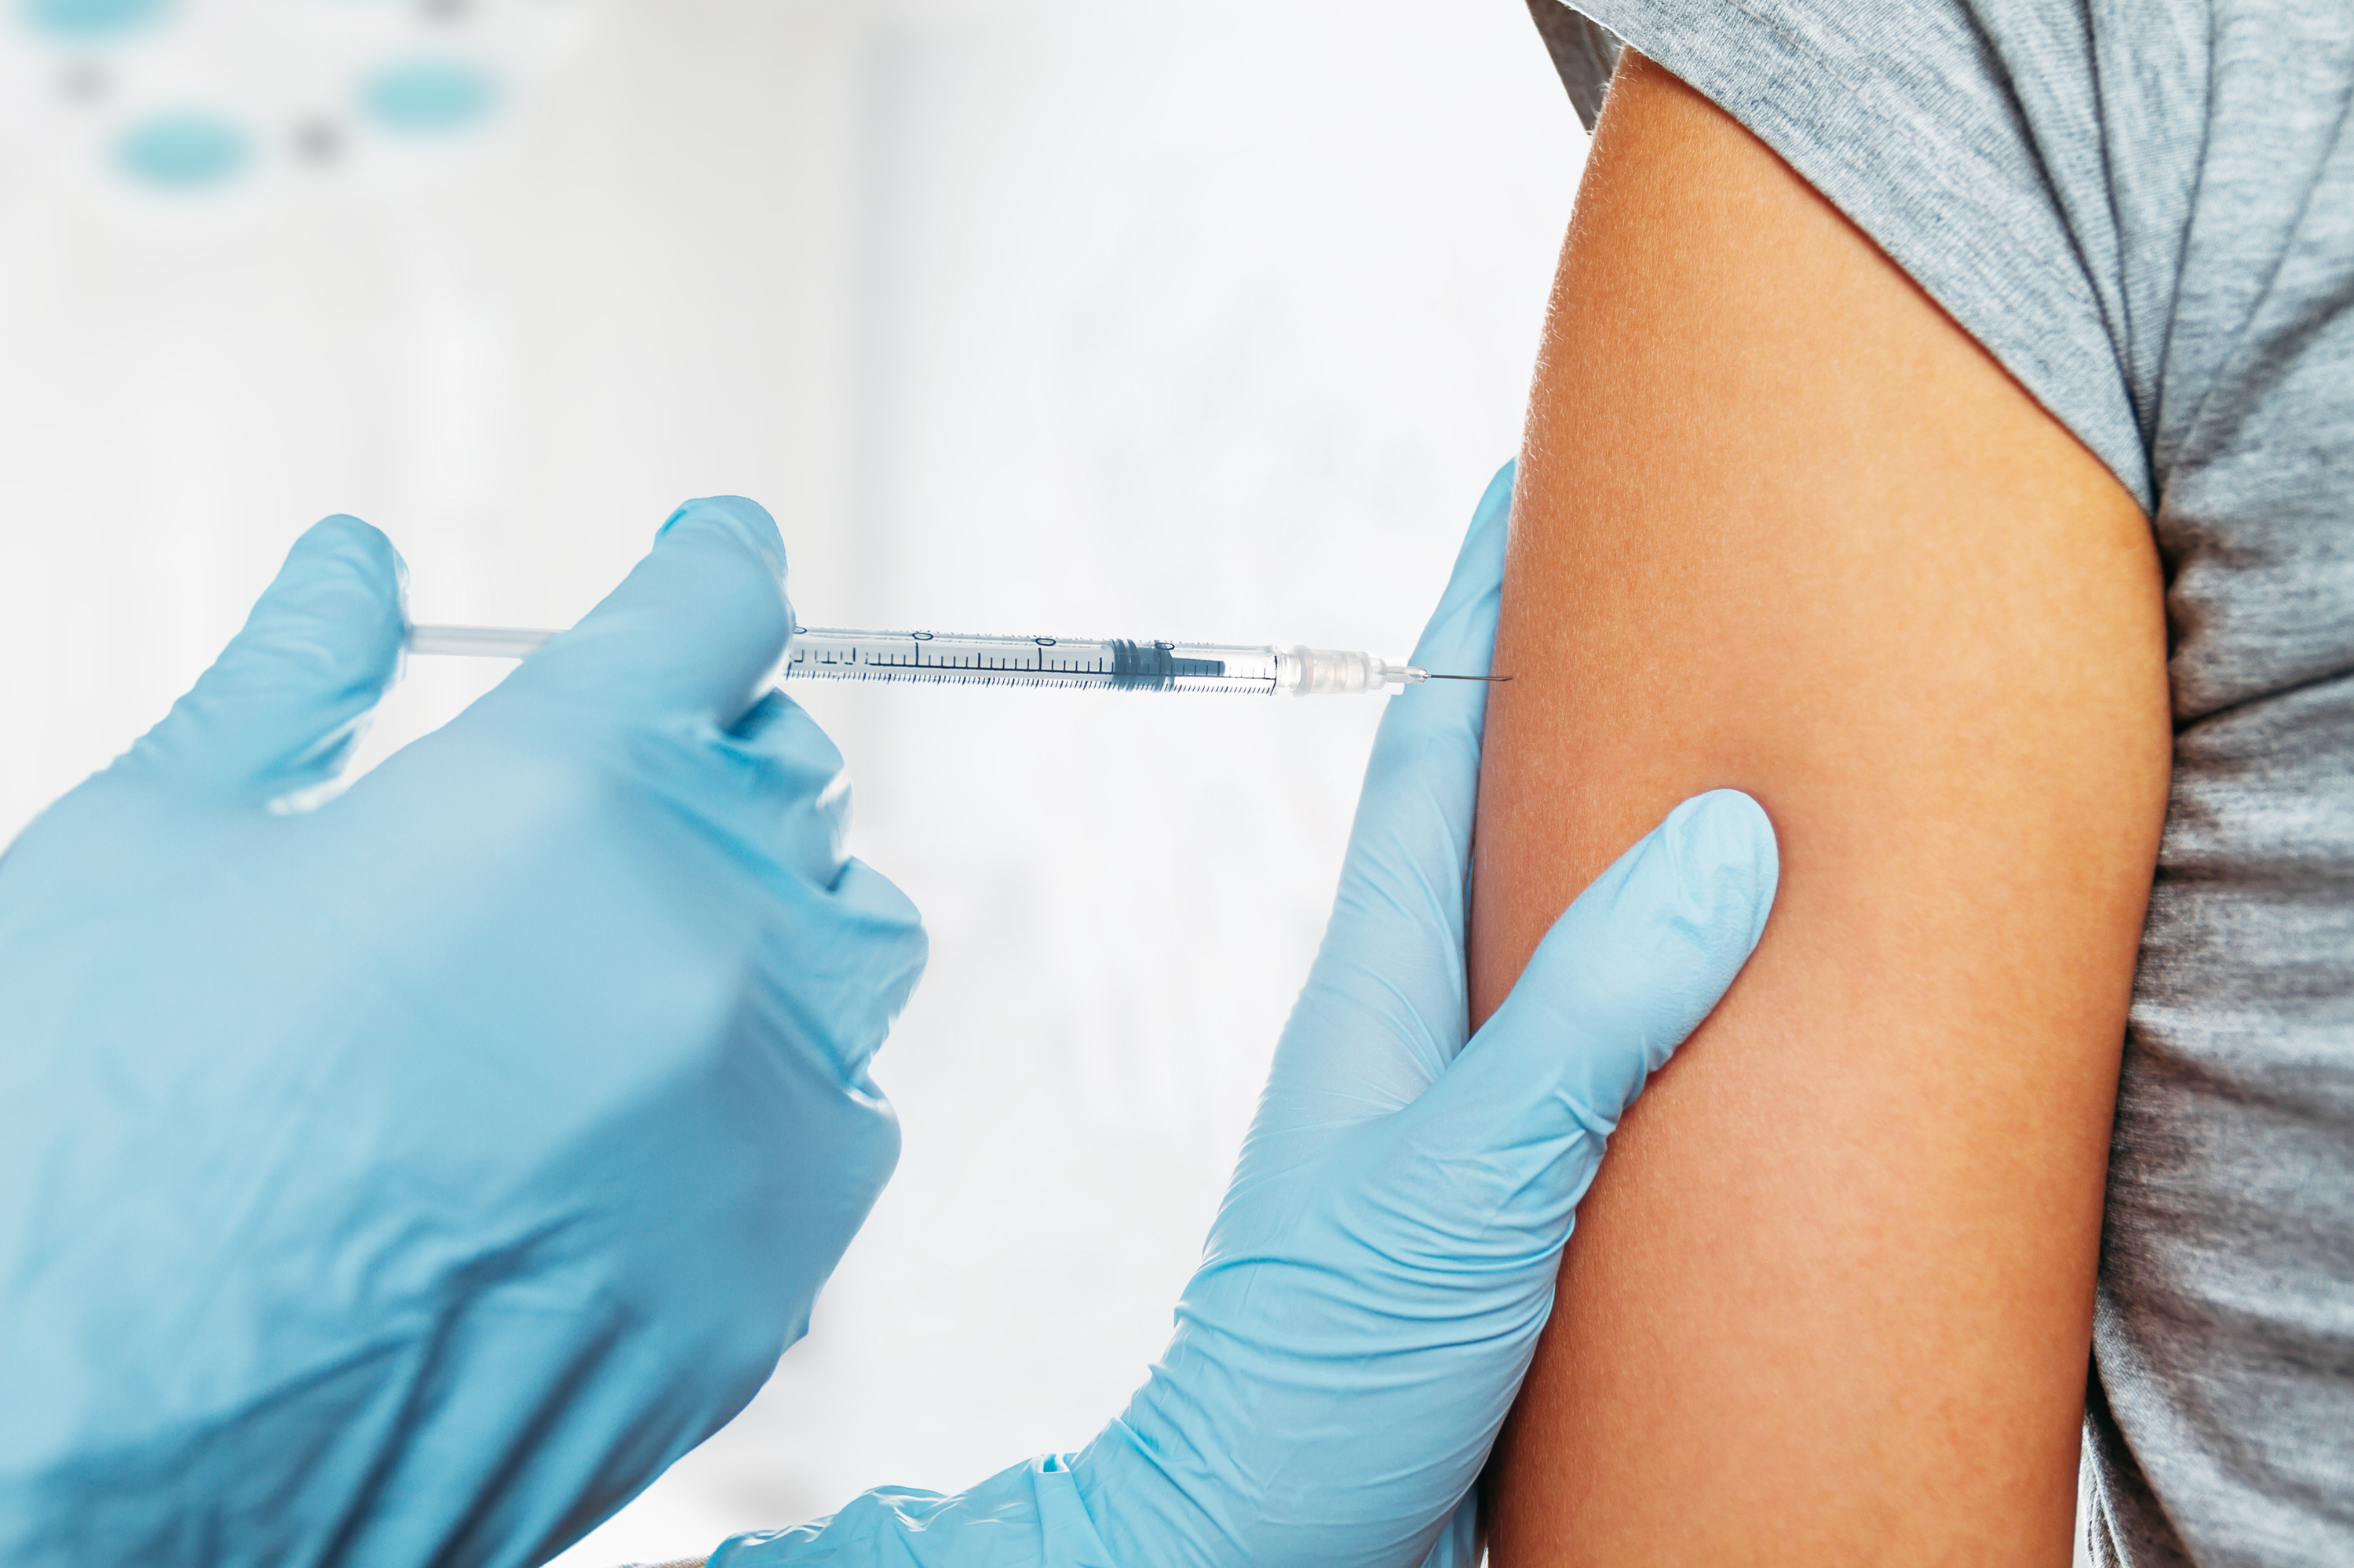 GPs are a key source of advice for immunisations